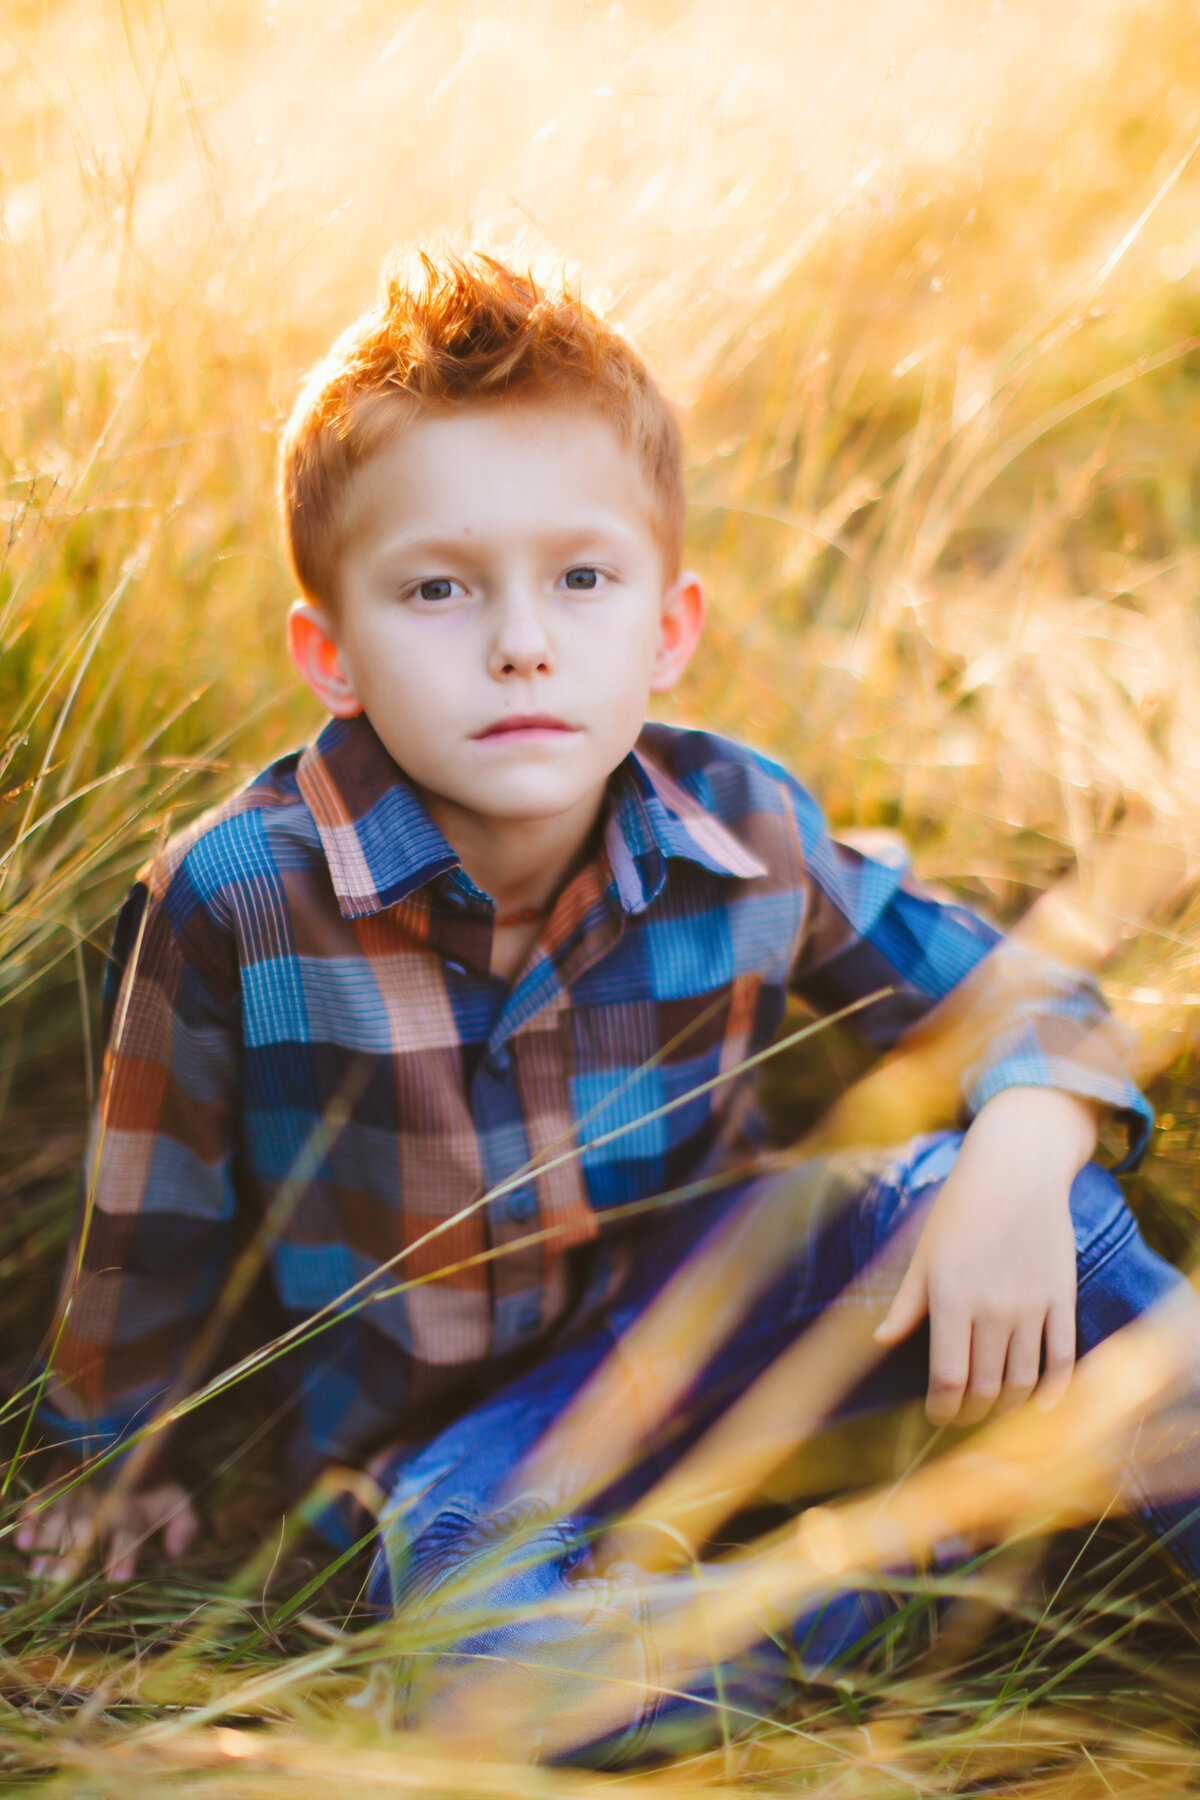 Turn to Dripping Springs' master of child photography for images that capture the essence of your little one